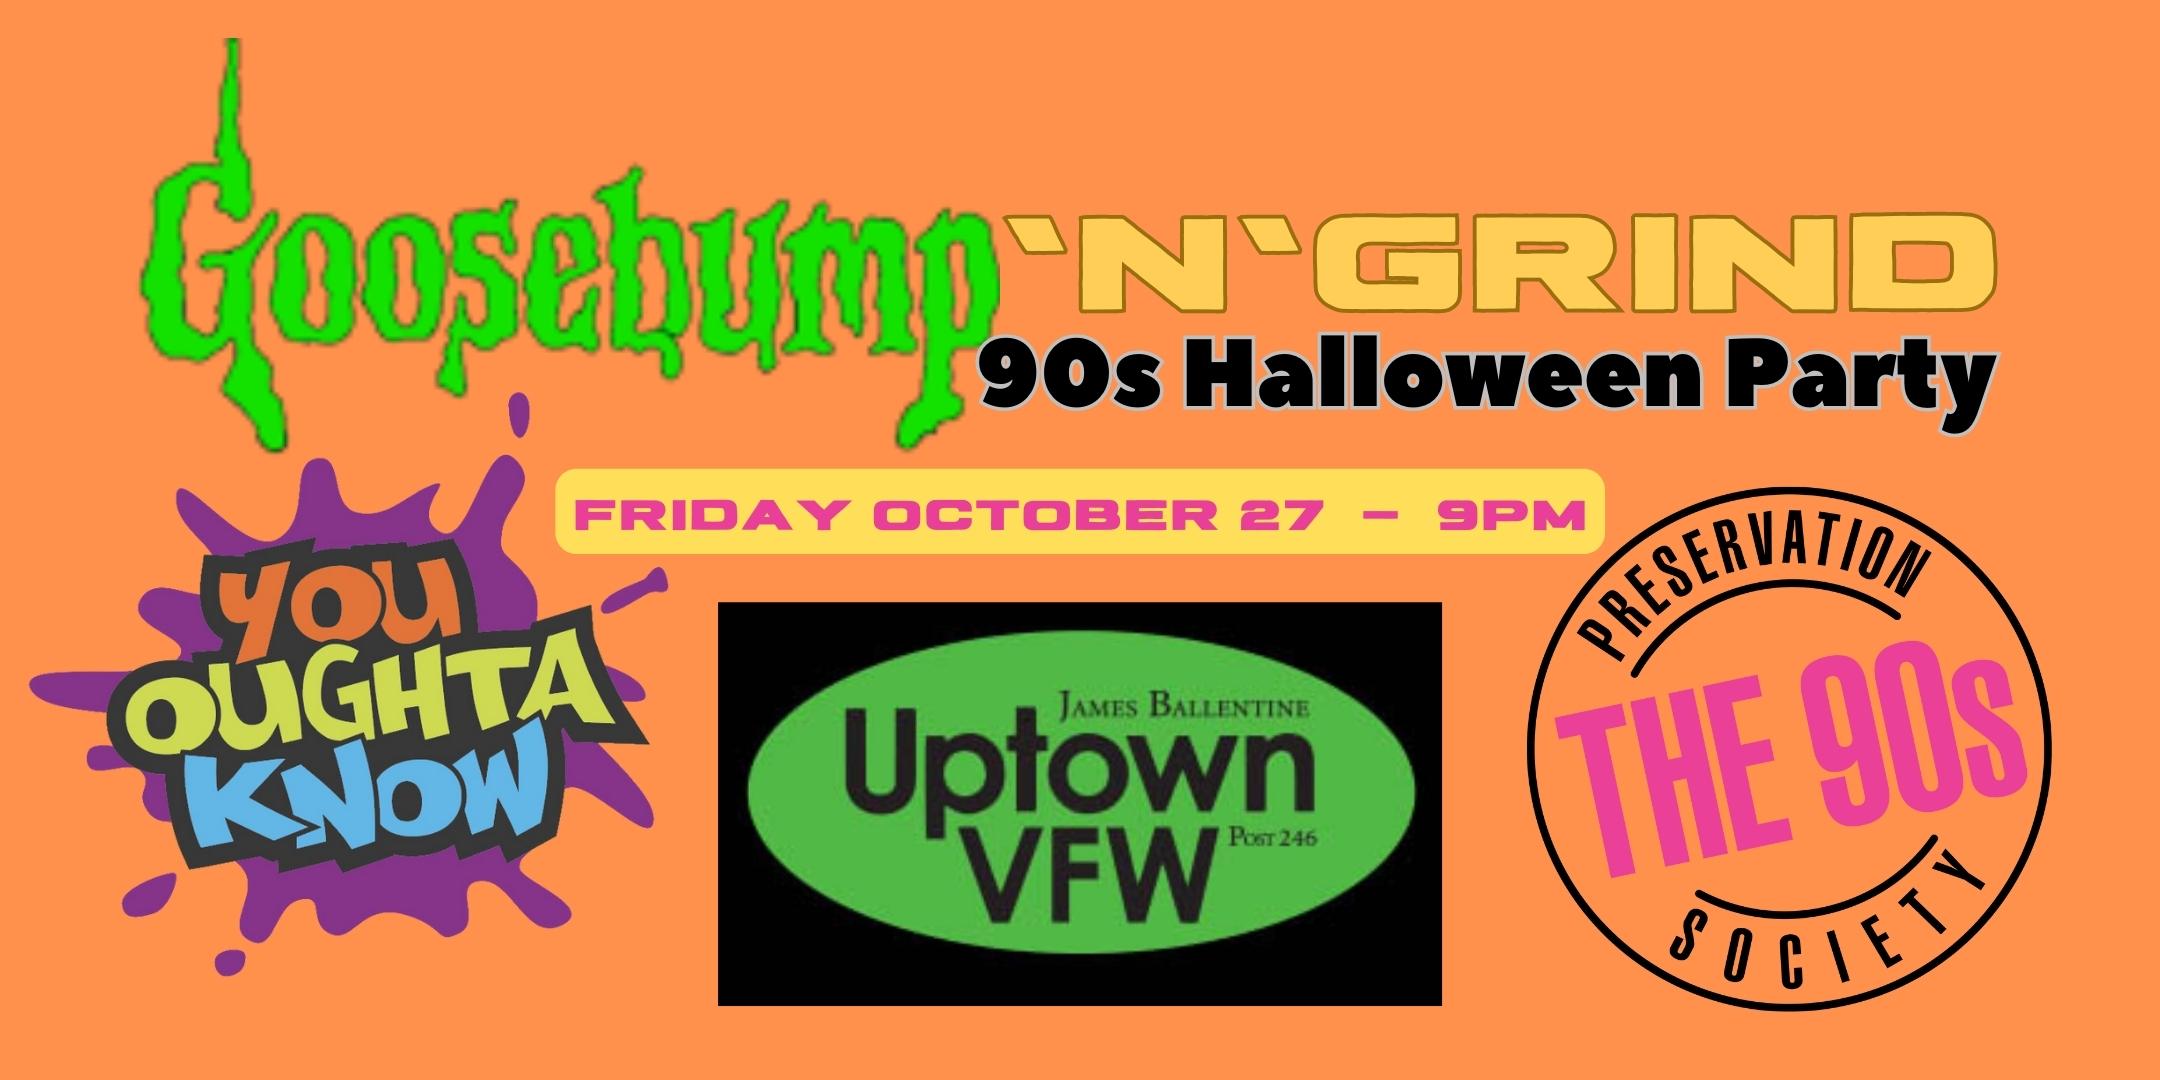 GooseBump 'N' Grind 90s Halloween Party with You Oughta Know + The 90s Preservation Society DJ / VJ Friday, October 27 James Ballentine "Uptown" VFW Post 246 Doors 9:00pm :: Music 9:00pm :: 21+ $15 ADV / $20 DOS NO REFUNDS